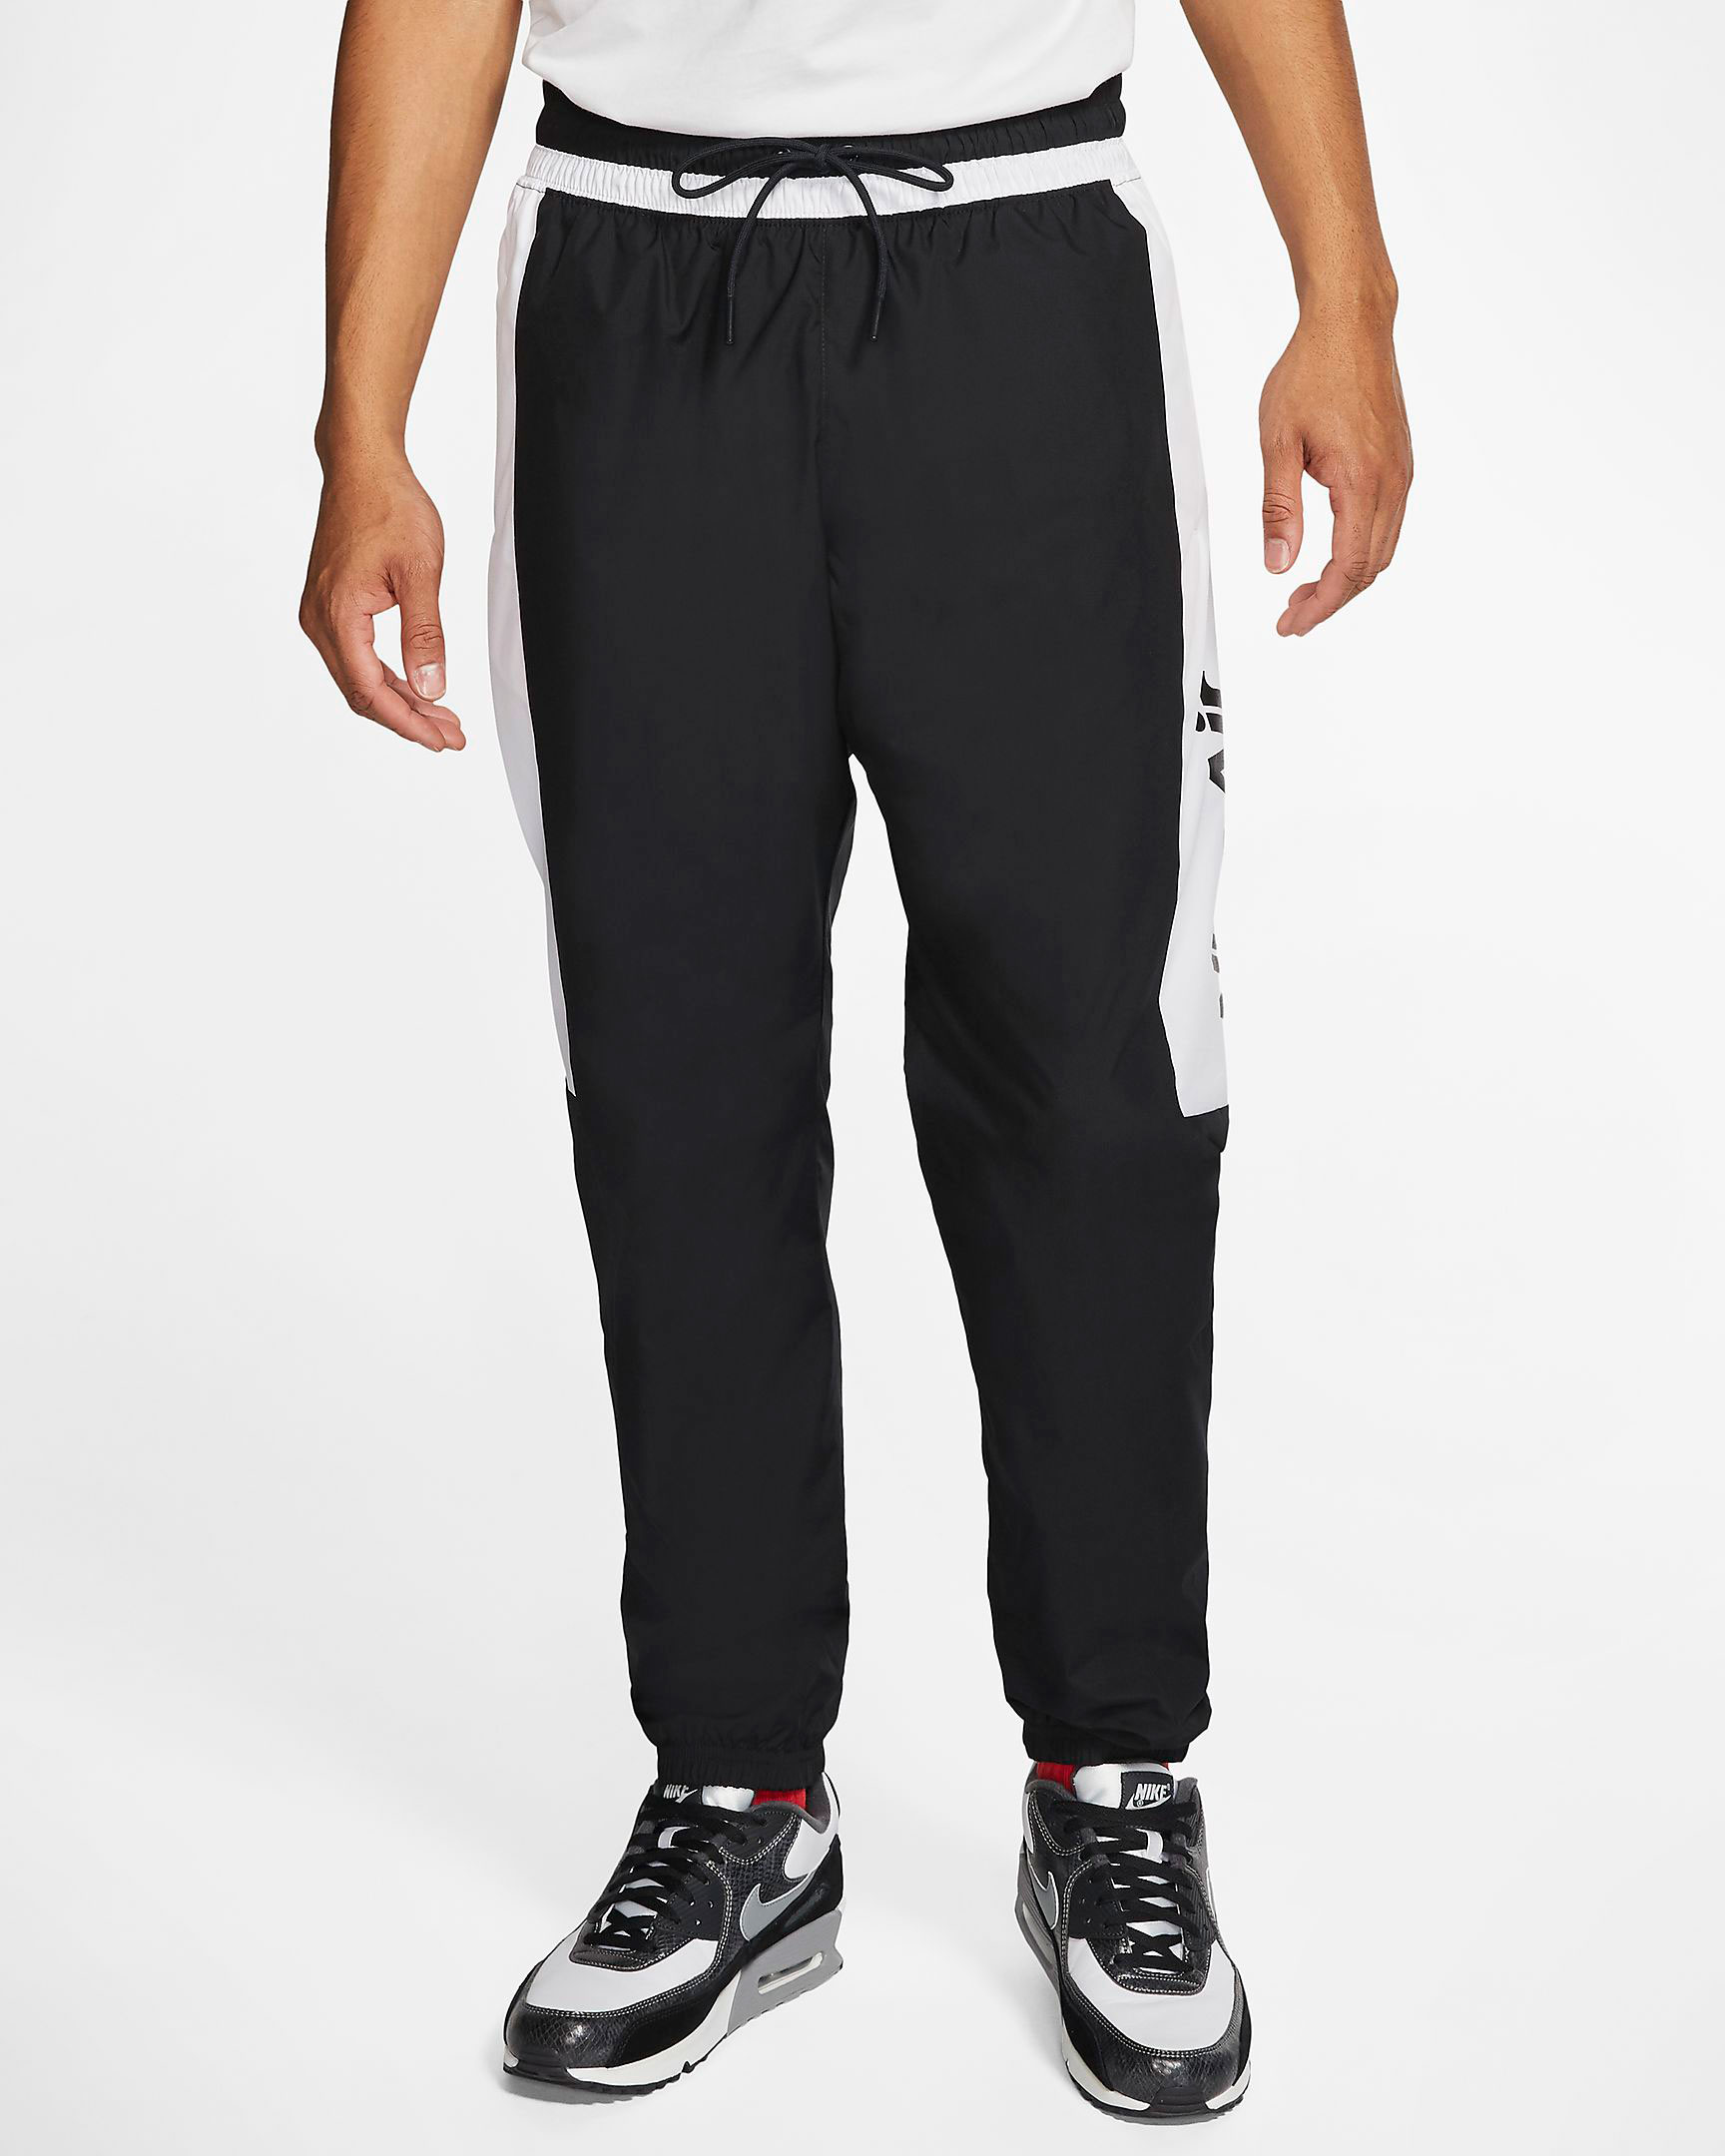 NEW Nike Air Apparel for Spring 2020 | SneakerFits.com